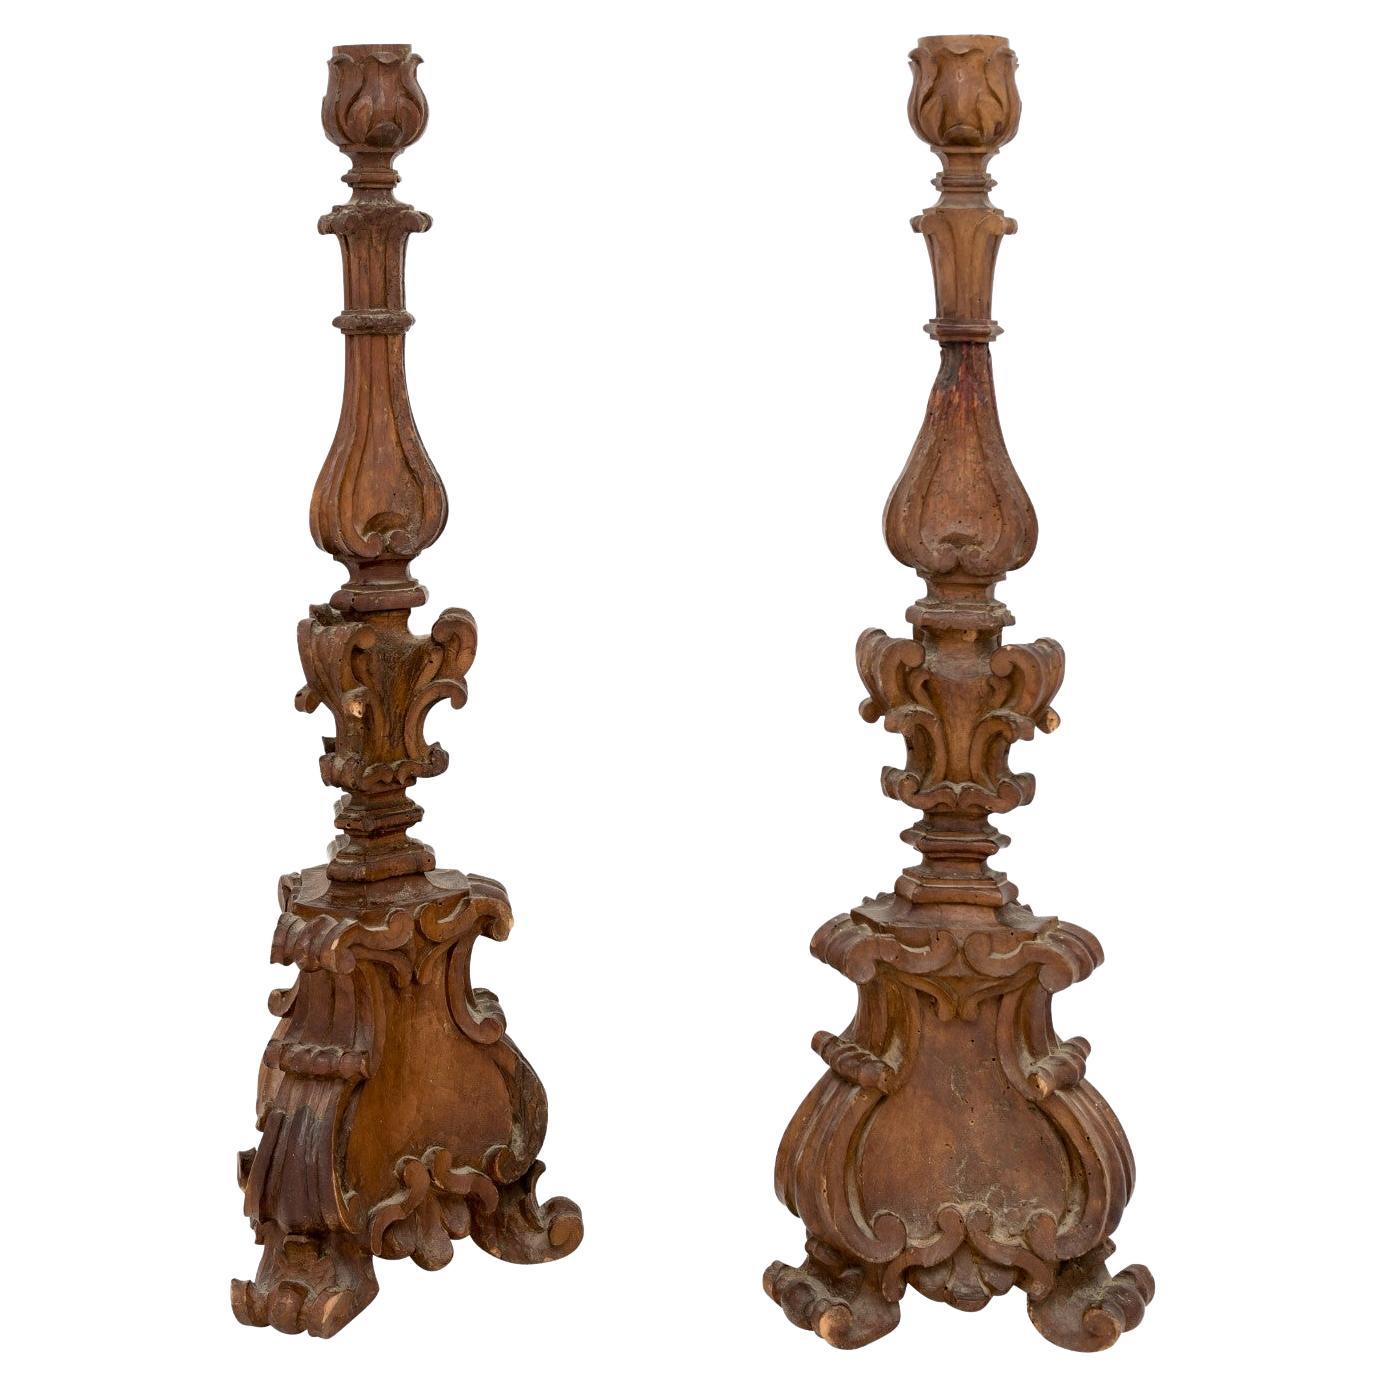 Pair of Italian 17th Century Baroque Period Altar Candlesticks with Carved Décor For Sale